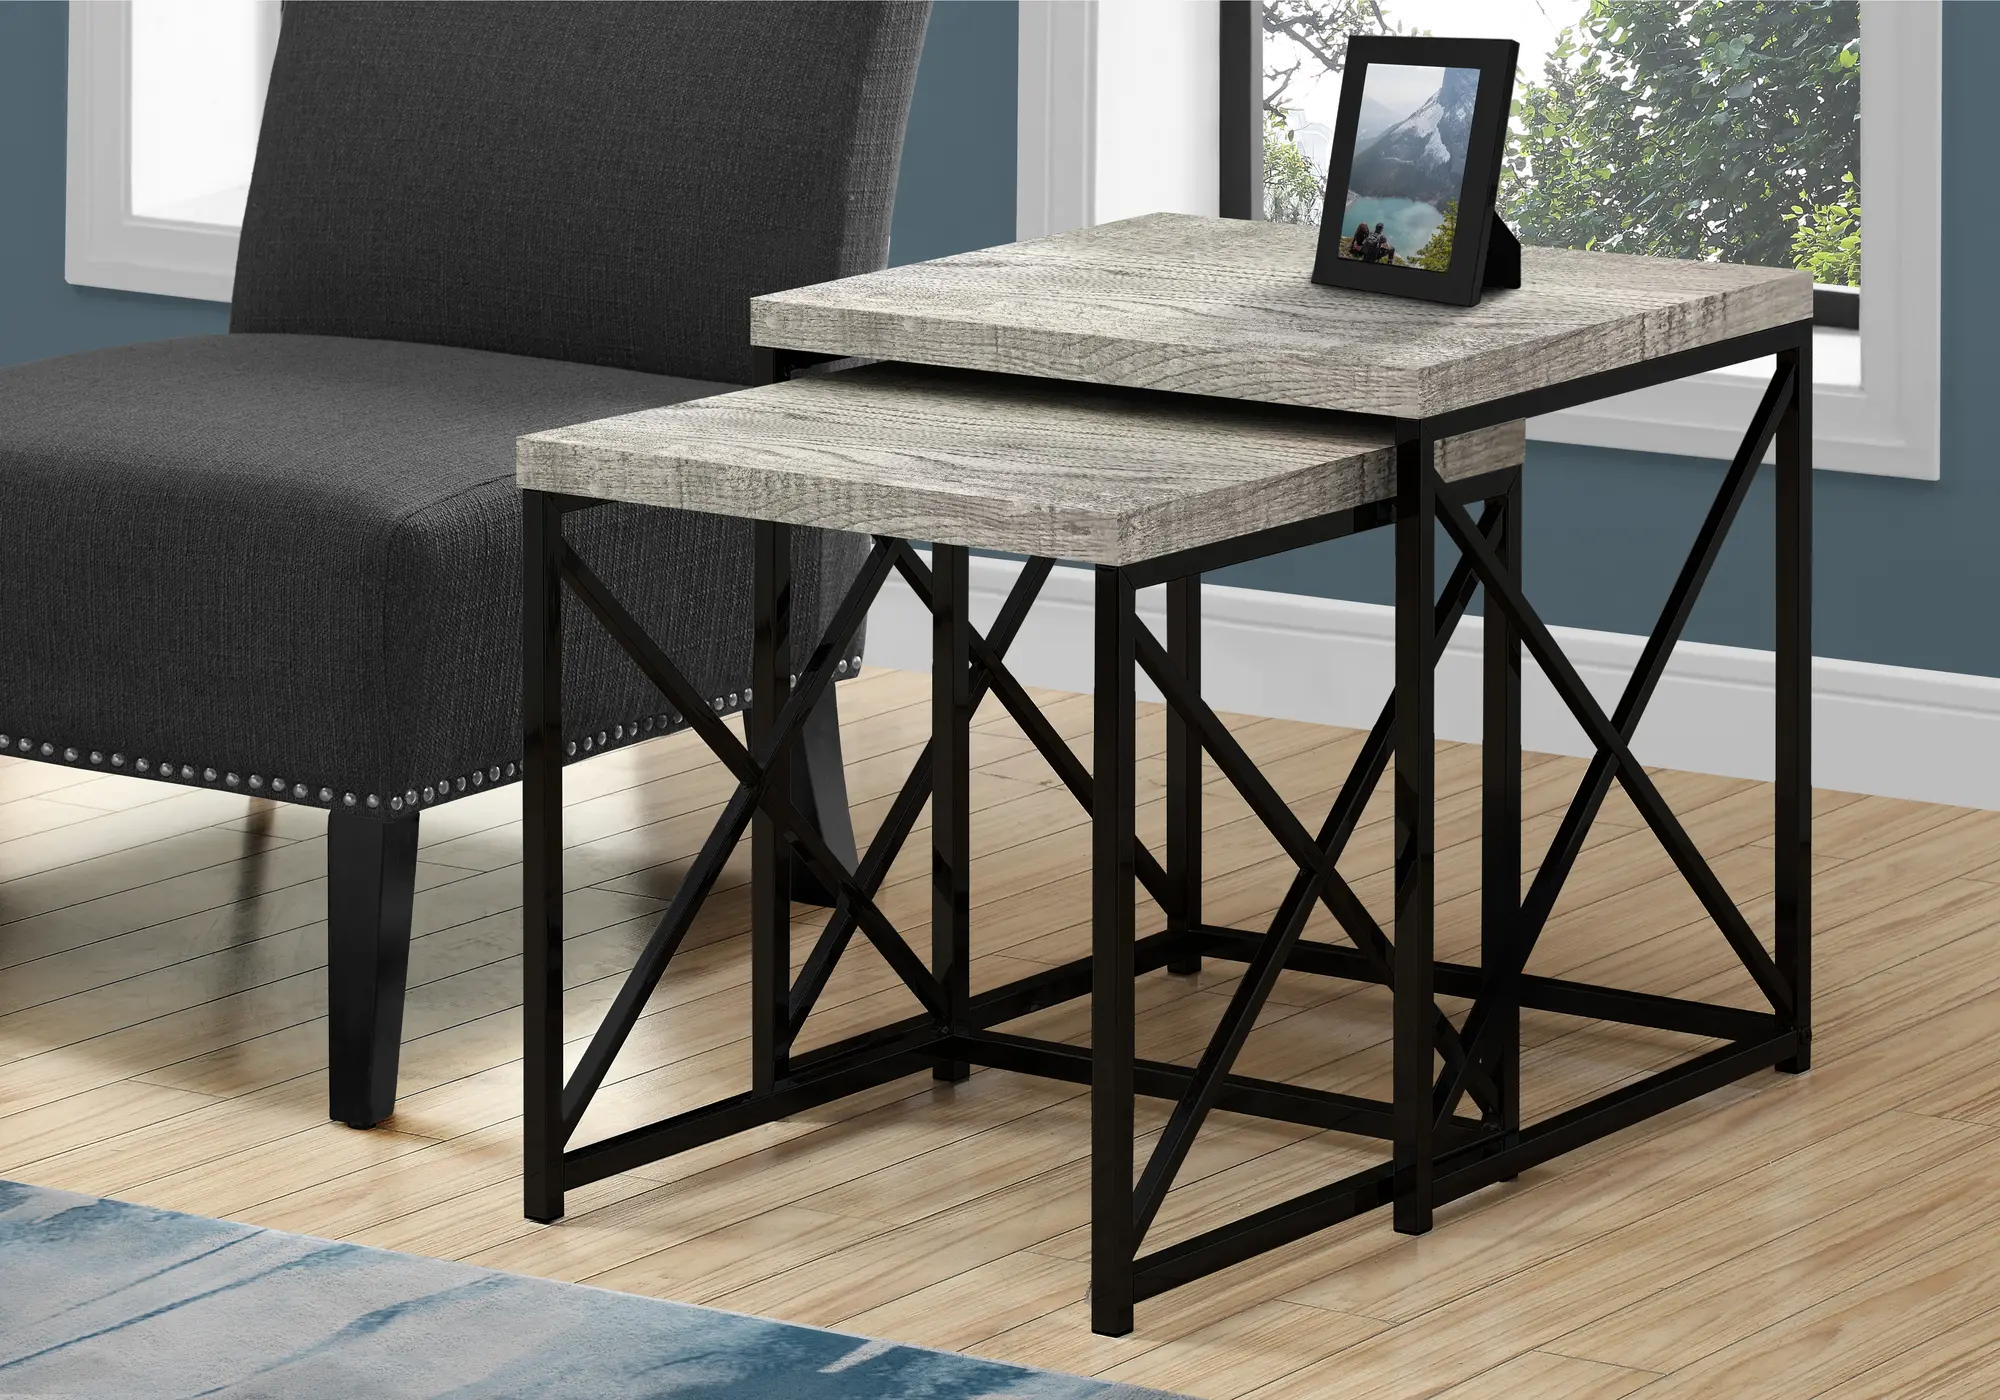 Gray Nesting Tables with Black Legs - Set of 2